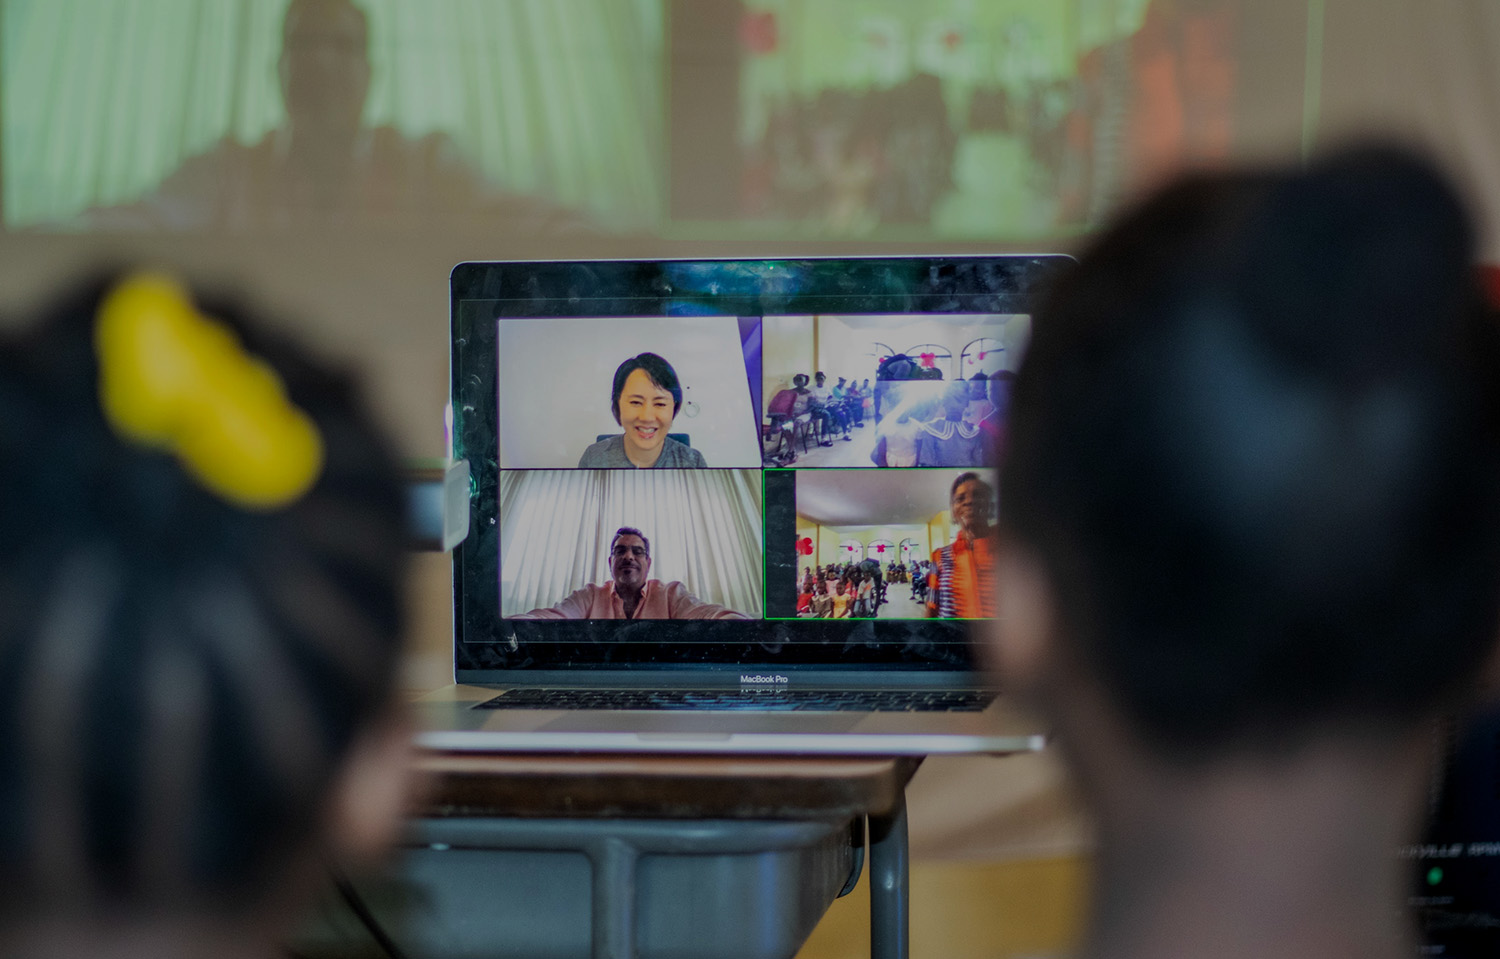 OUR CHILDREN CELEBRATED MOTHER’S DAY WITH A SURPRISE VIDEO CALL FROM OUR CEO, Helen Kim, WHICH BROUGHT JOY…